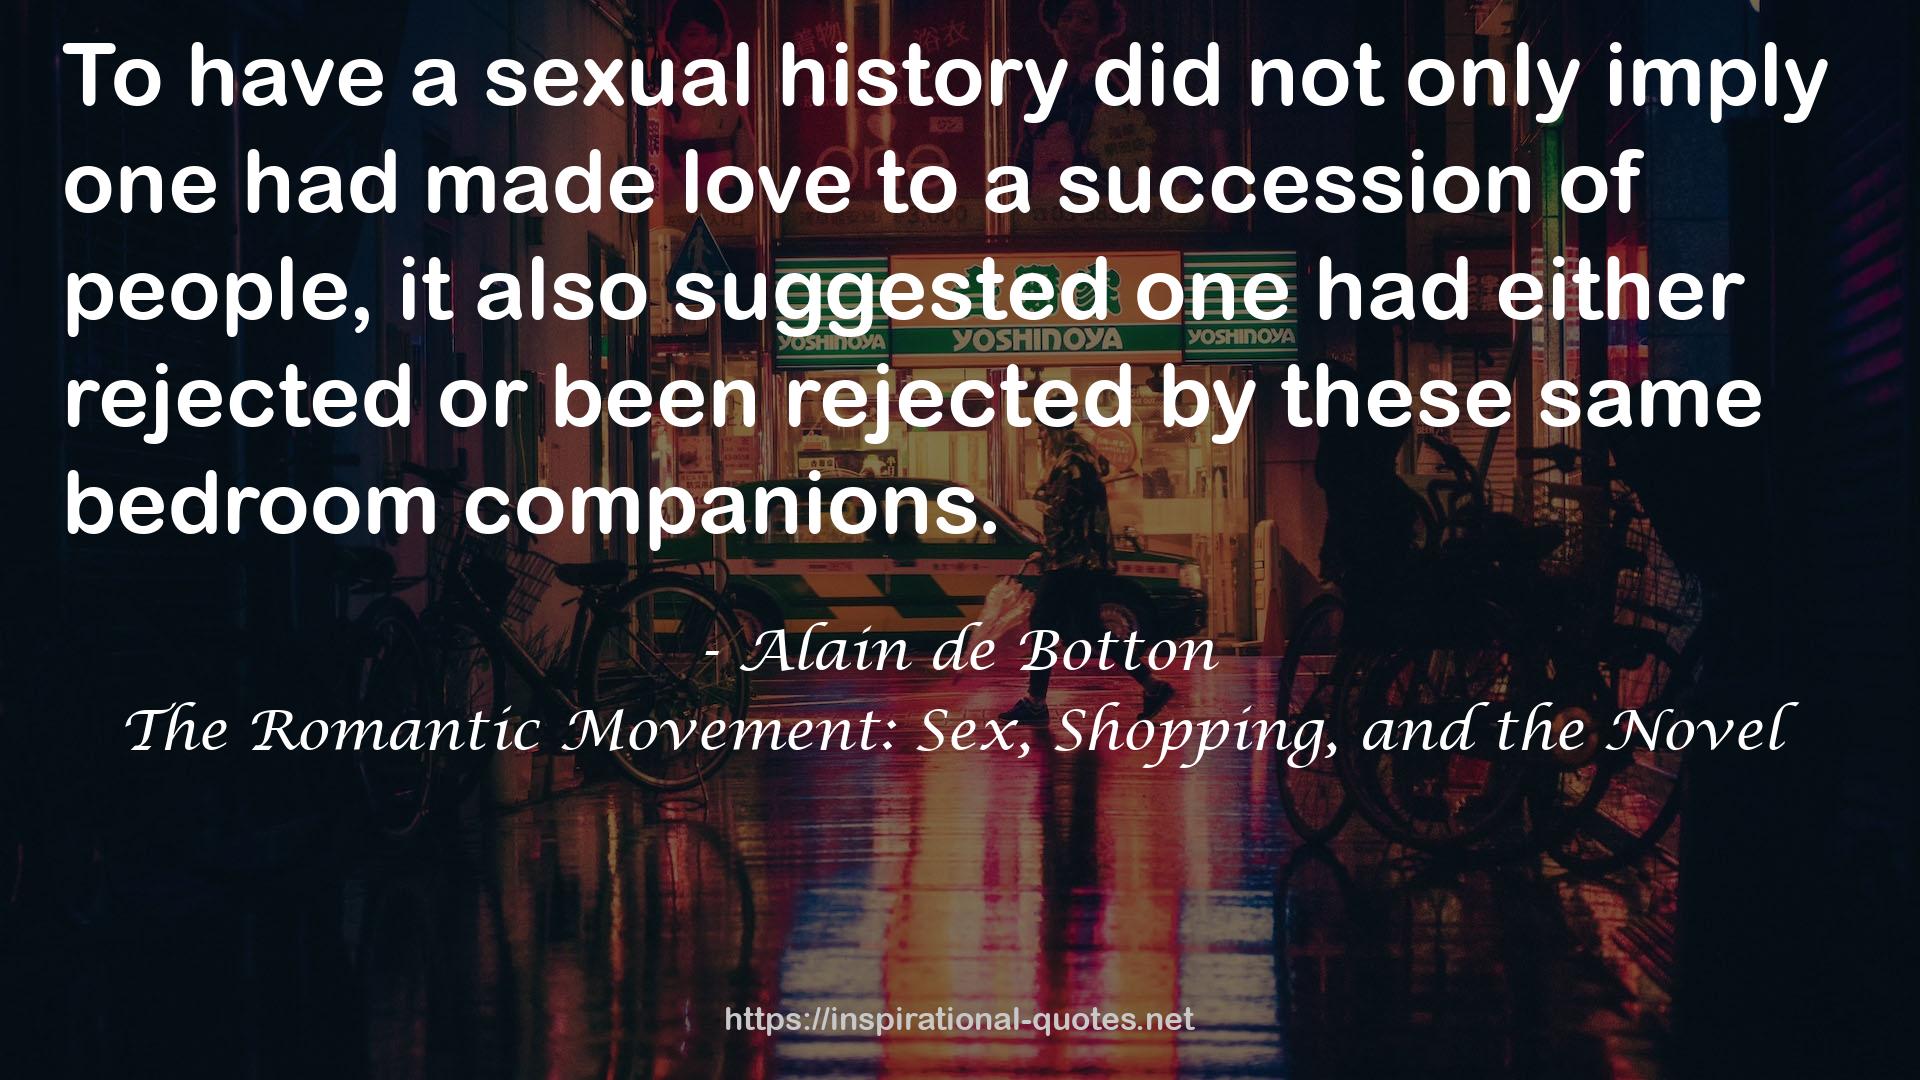 The Romantic Movement: Sex, Shopping, and the Novel QUOTES